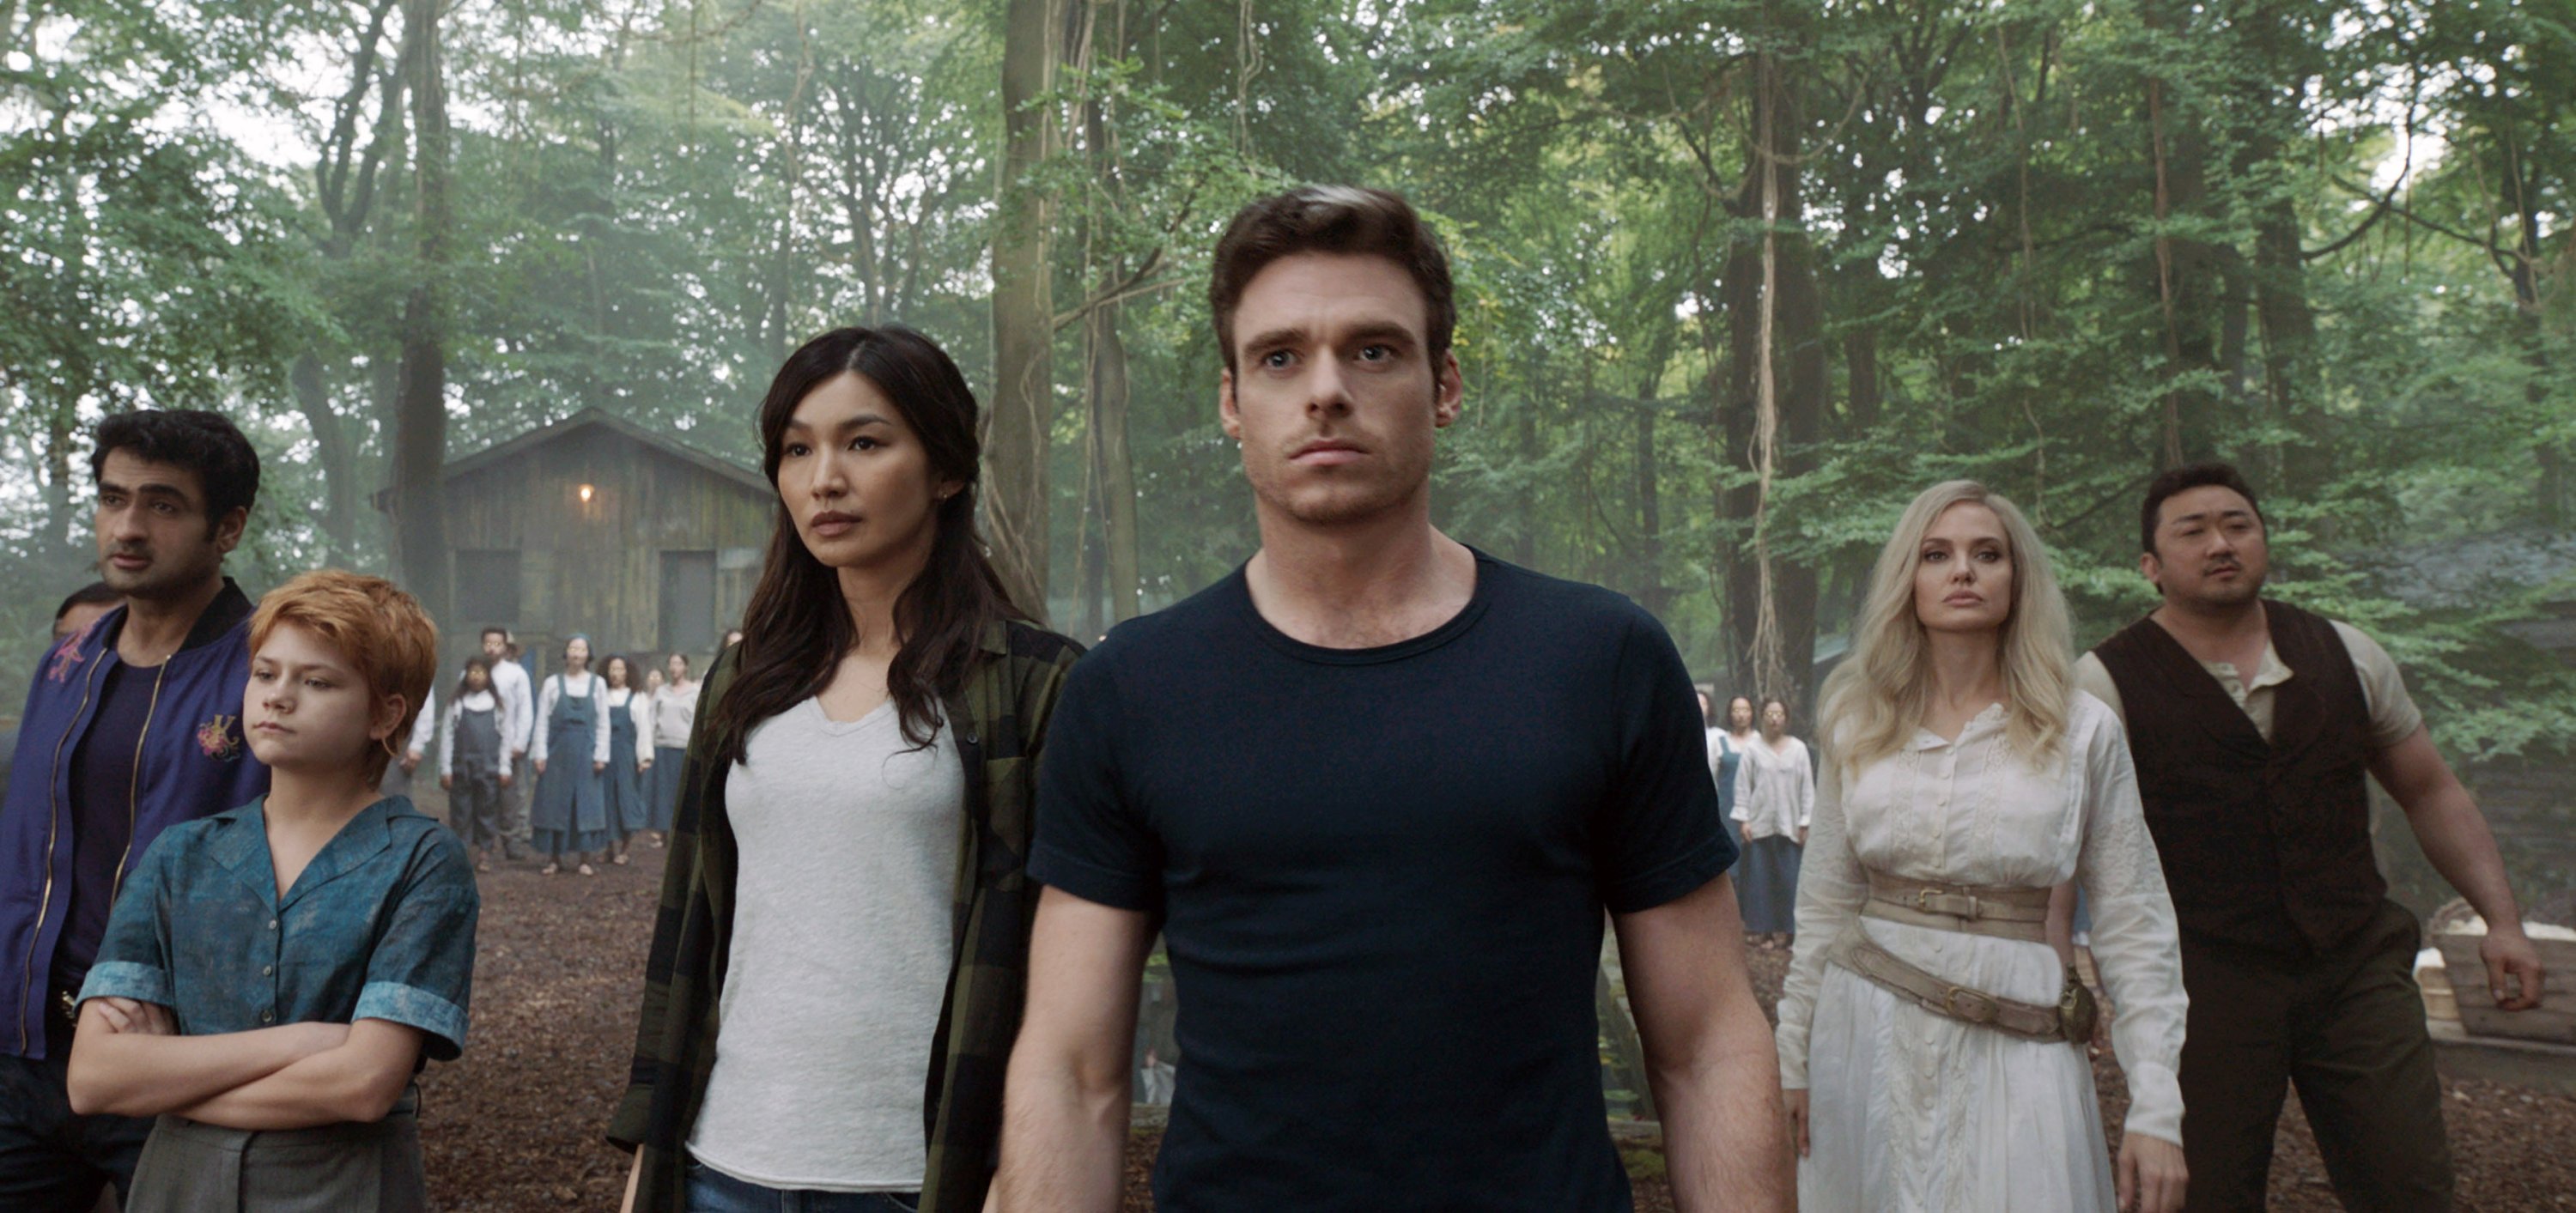 From the left, Kumail Nanjiani, Lia McHugh, Gemma Chan, Richard Madden, Angelina Jolie and Don Lee, in a scene from the Marvel film 'Eternals.' (Marvel Studios via AP)